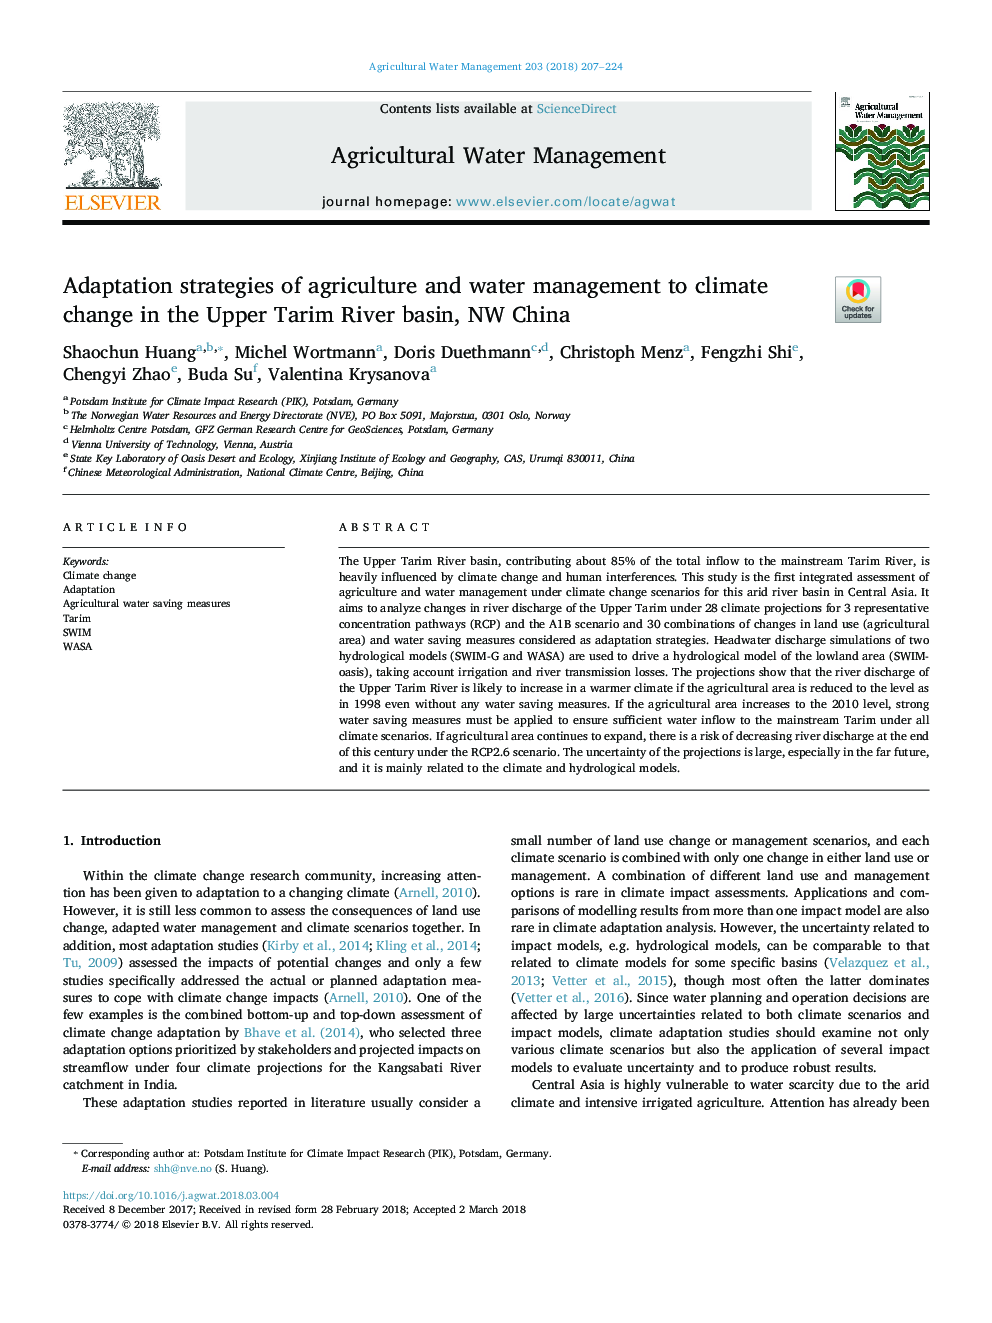 Adaptation strategies of agriculture and water management to climate change in the Upper Tarim River basin, NW China